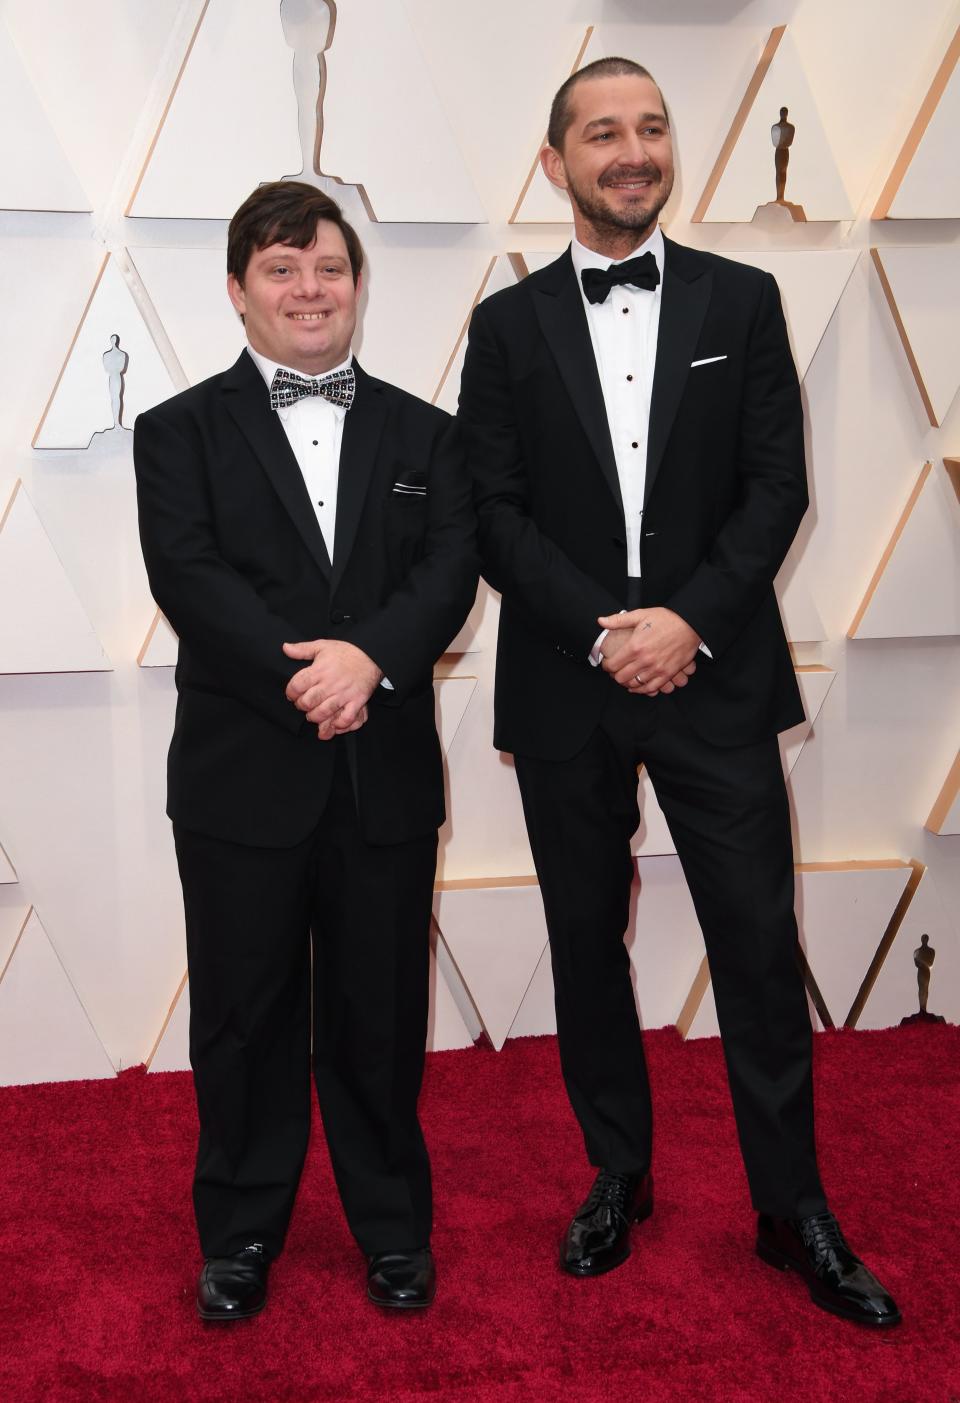 Zack Gottsagen and Shia LaBeouf (in Tod's shoes and Montblanc cufflinks)